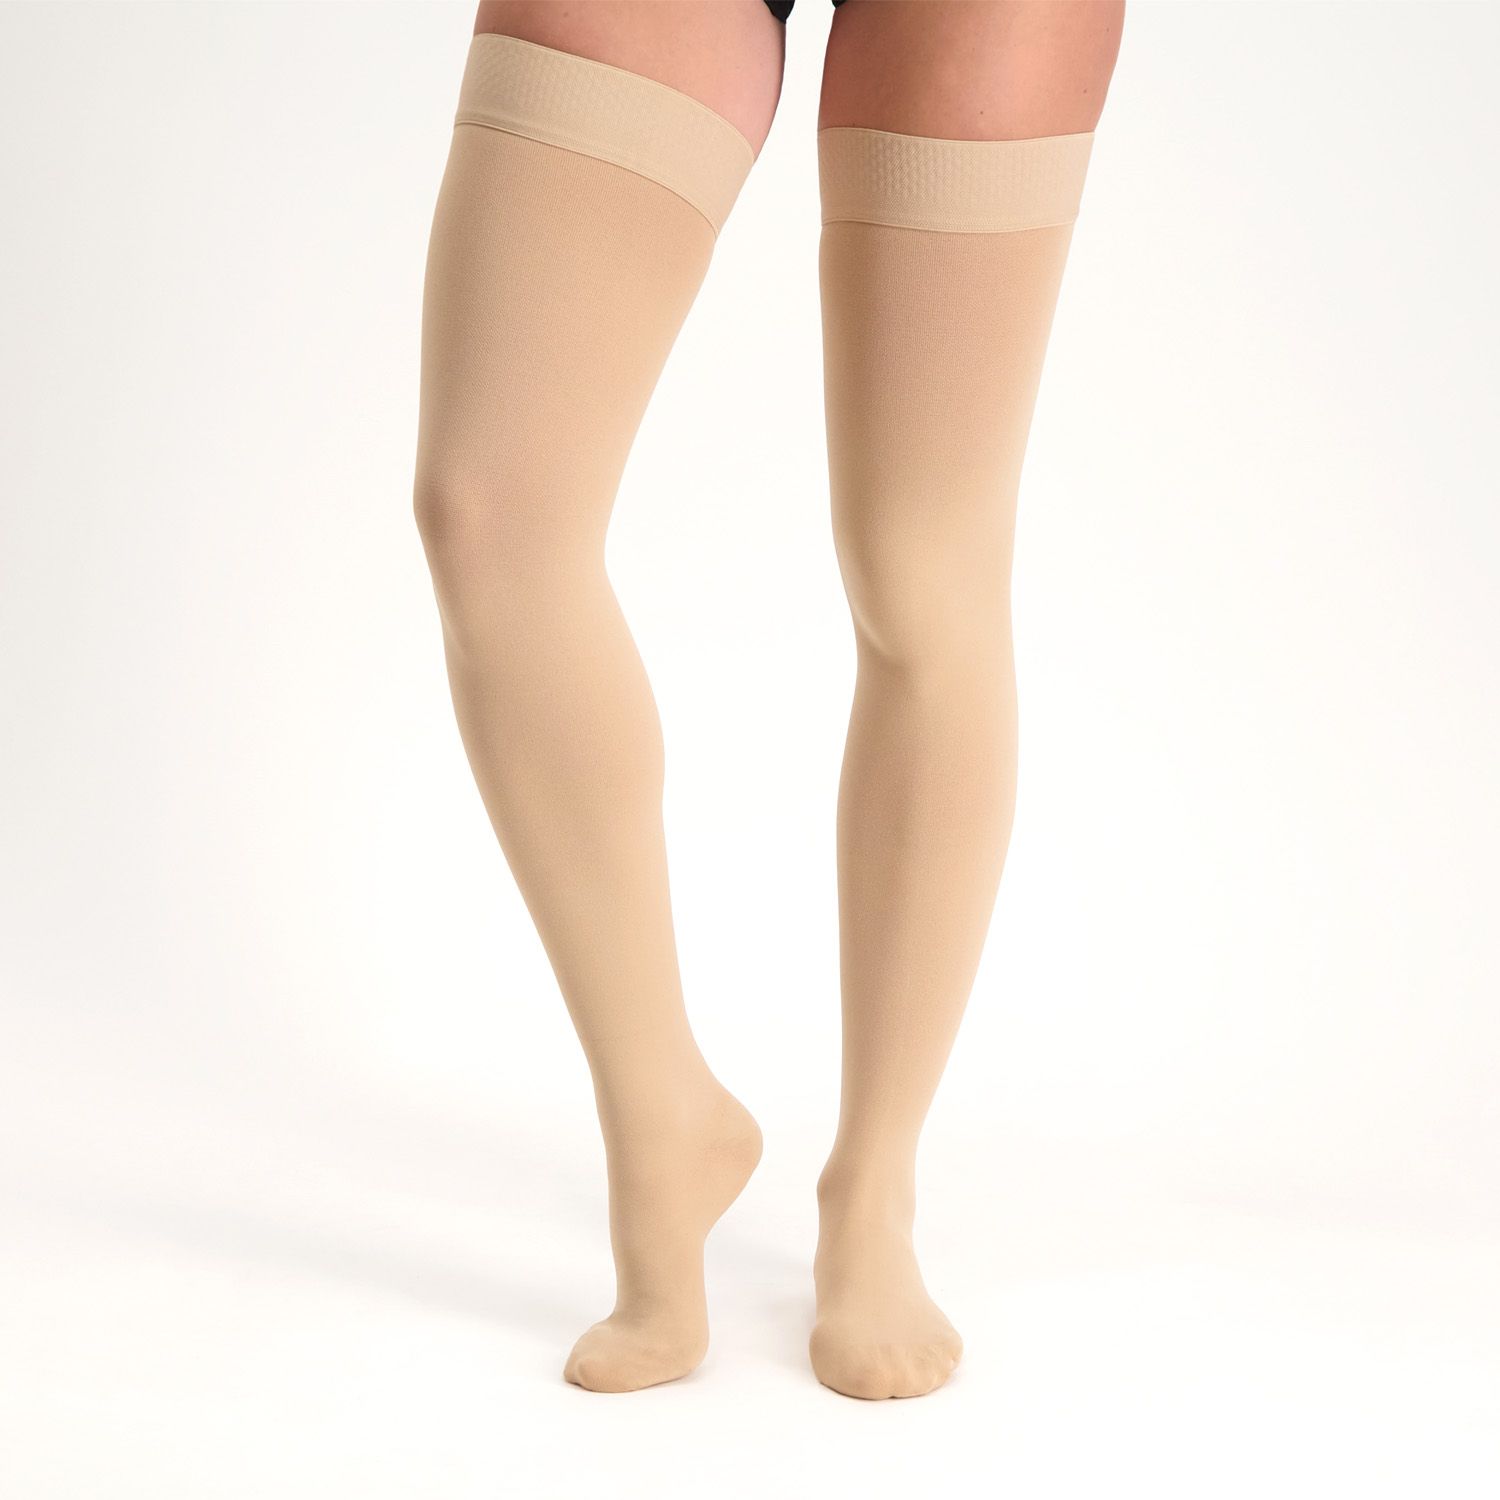 dunimed premium comfort compression stockings groin length closed toe worn while seated